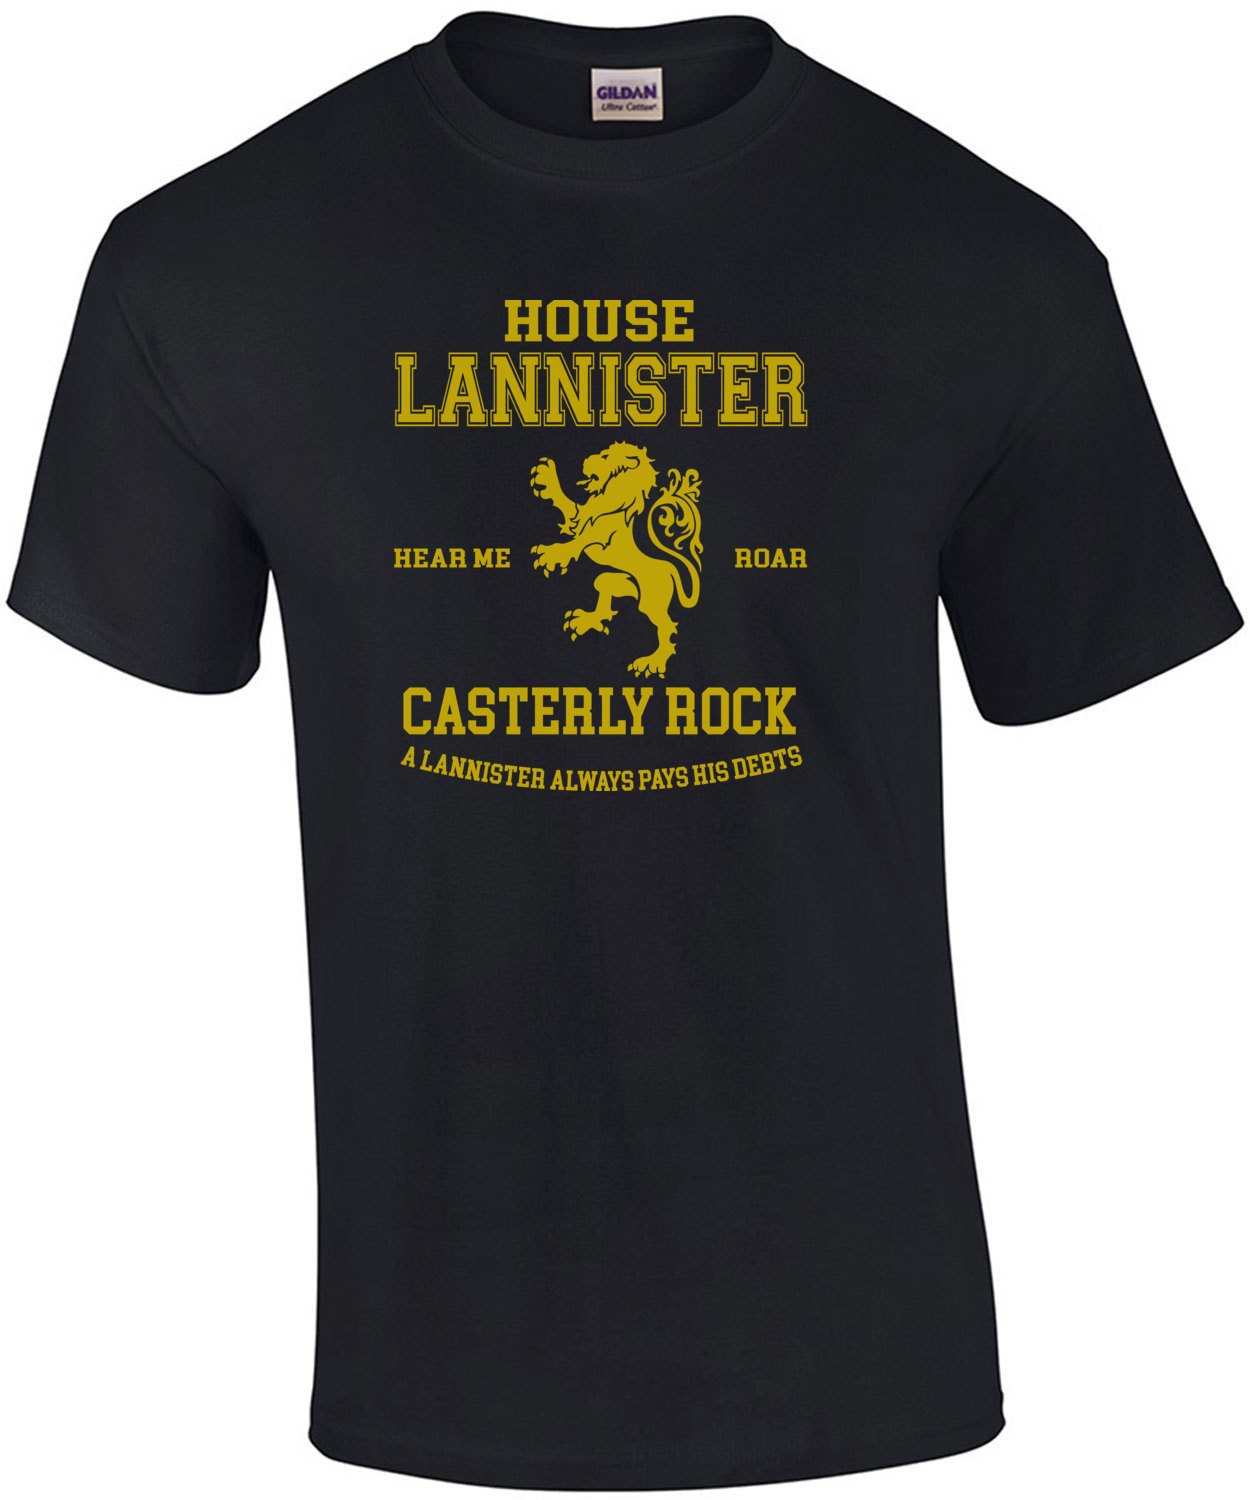 House Lannister - Hear my roar - Casterly rock - A lannister always pays his debts - Game of Thrones T-Shirt